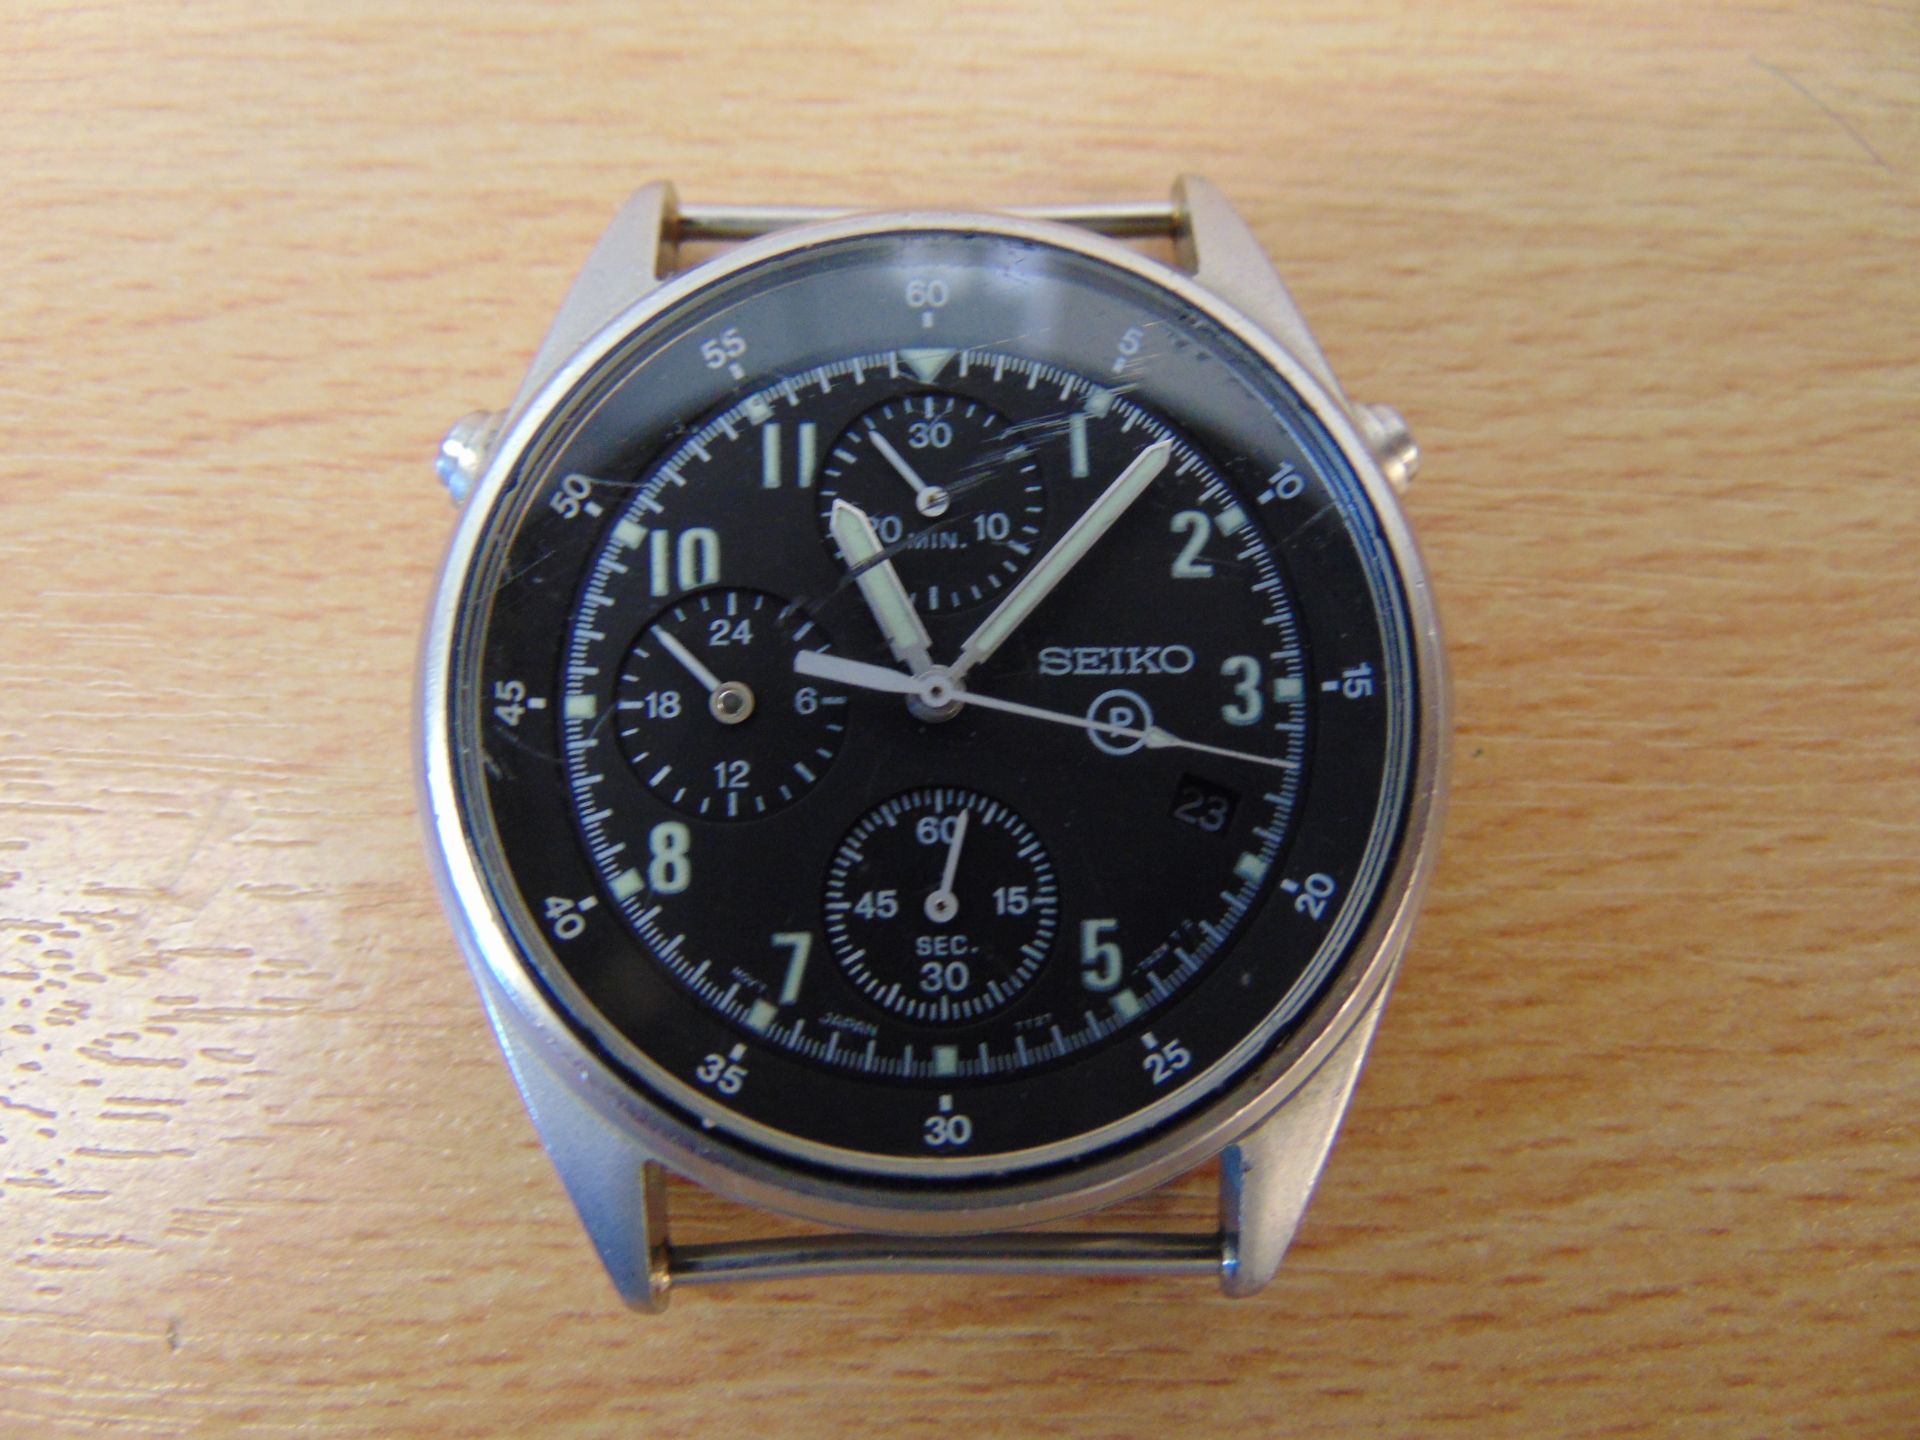 Seiko Gen 2 Pilots Chrono (with date), RAF Tornado force issue Nato marks Date 1993, - Image 2 of 4